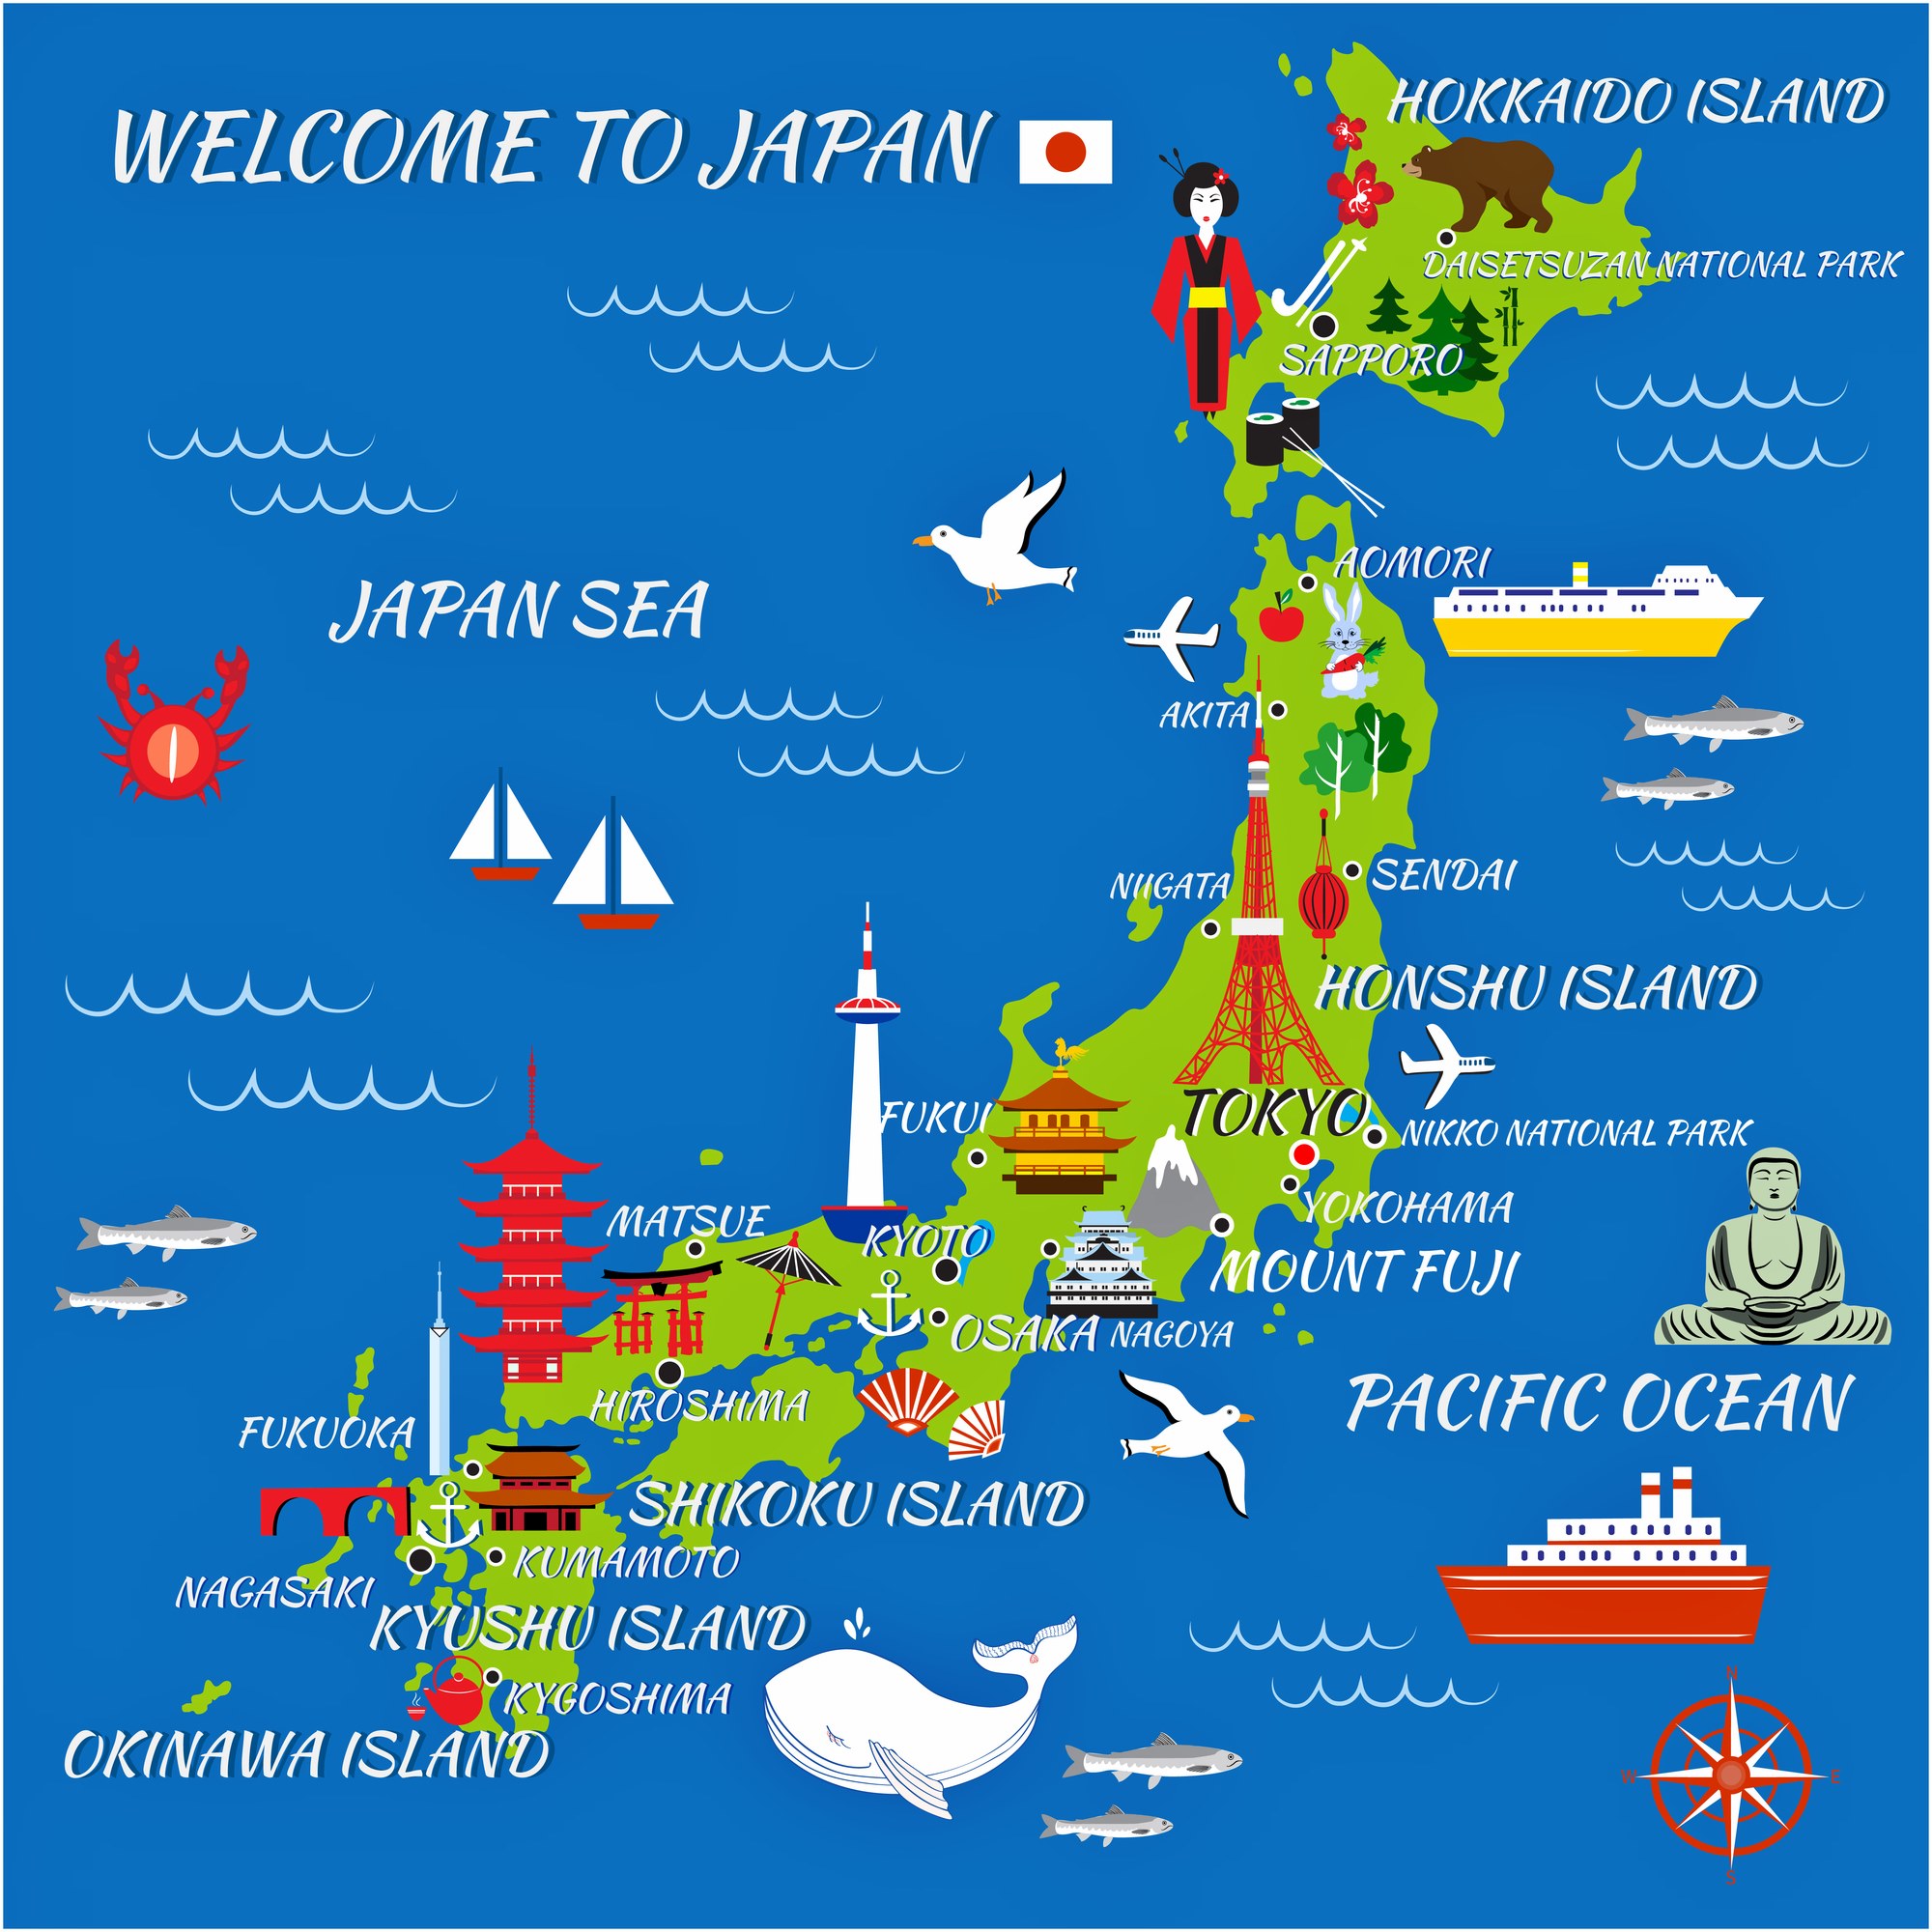 Japan Map of Major Sights and Attractions - OrangeSmile.com